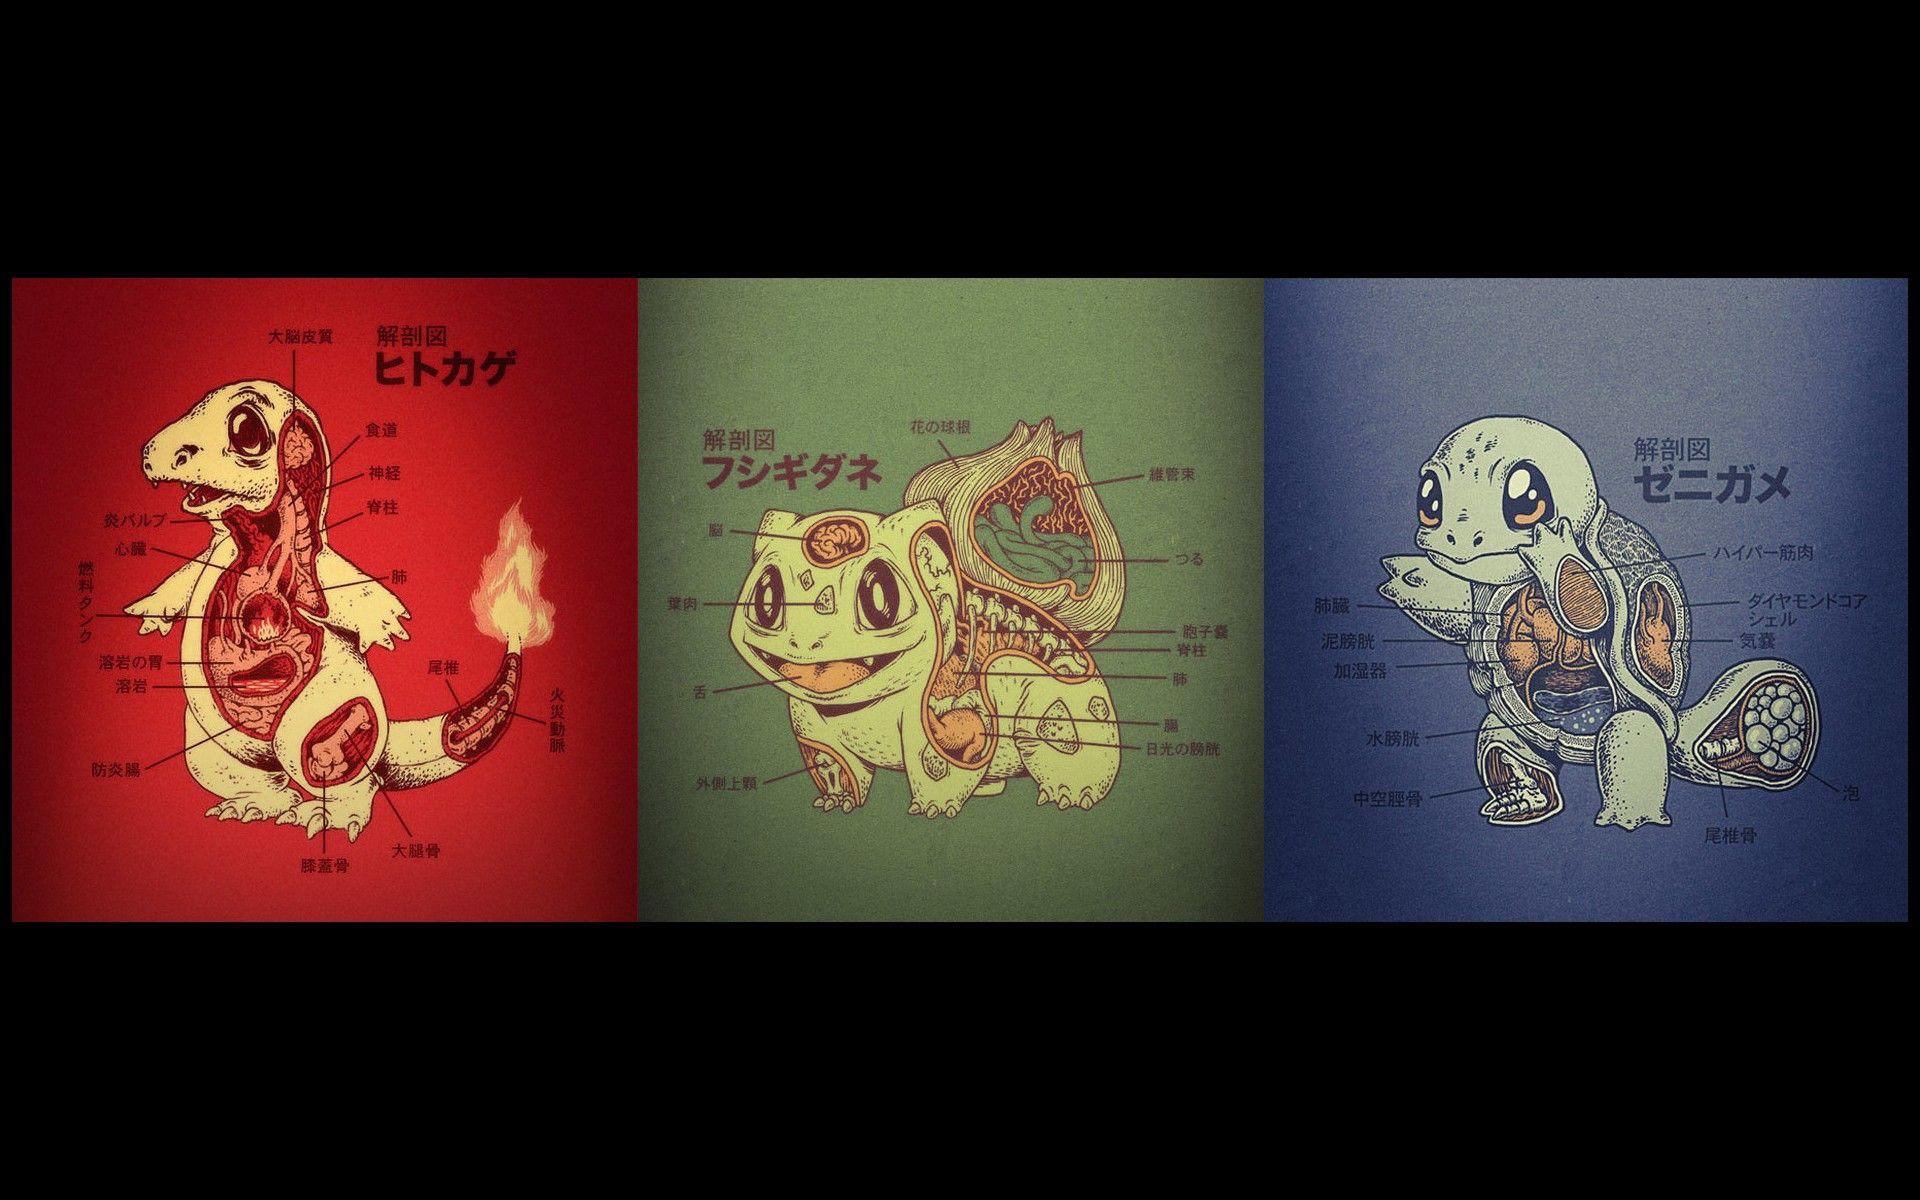 Download the Dissecting Pokemon Wallpaper, Dissecting Pokemon iPhone